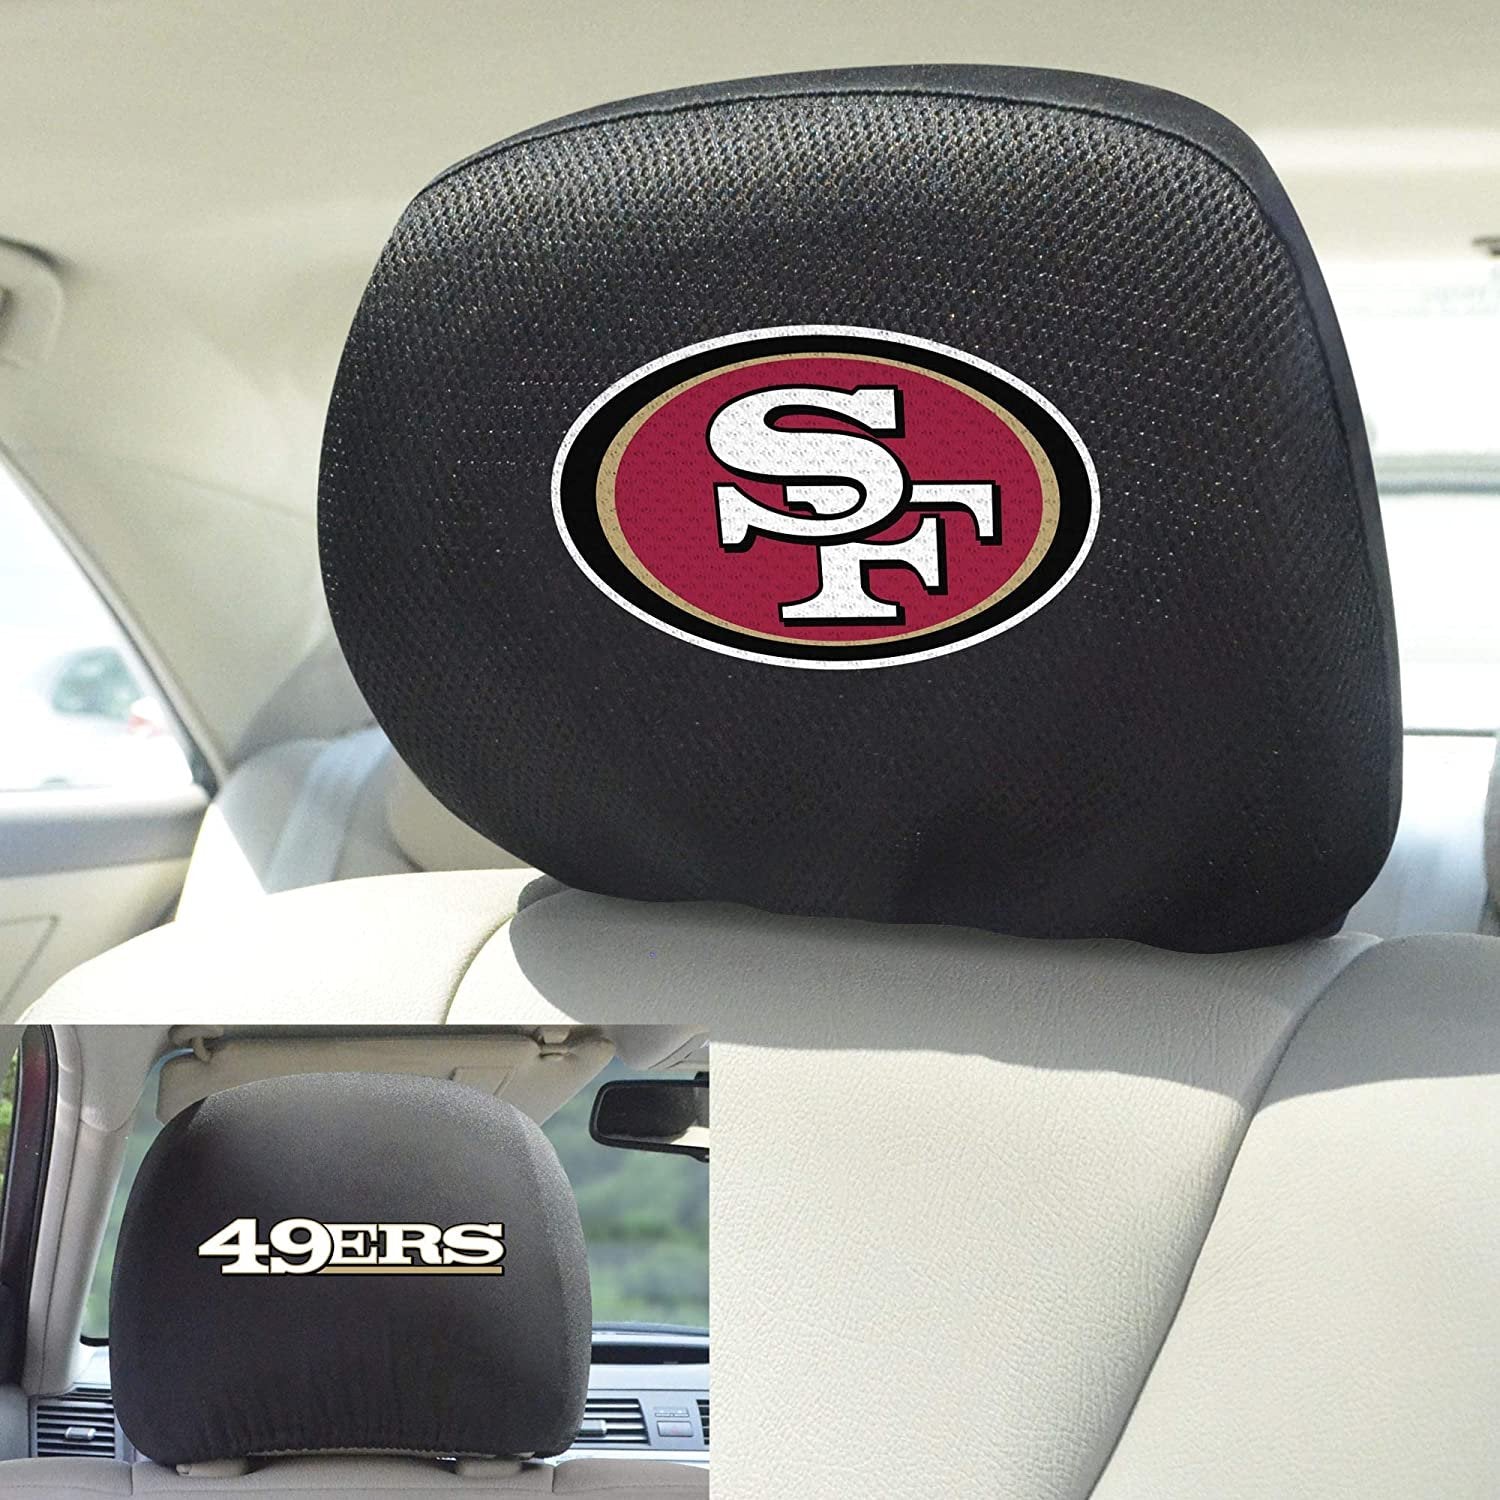 San Francisco 49ers Pair of Premium Auto Head Rest Covers, Embroidered, Black Elastic, 14x10 Inch